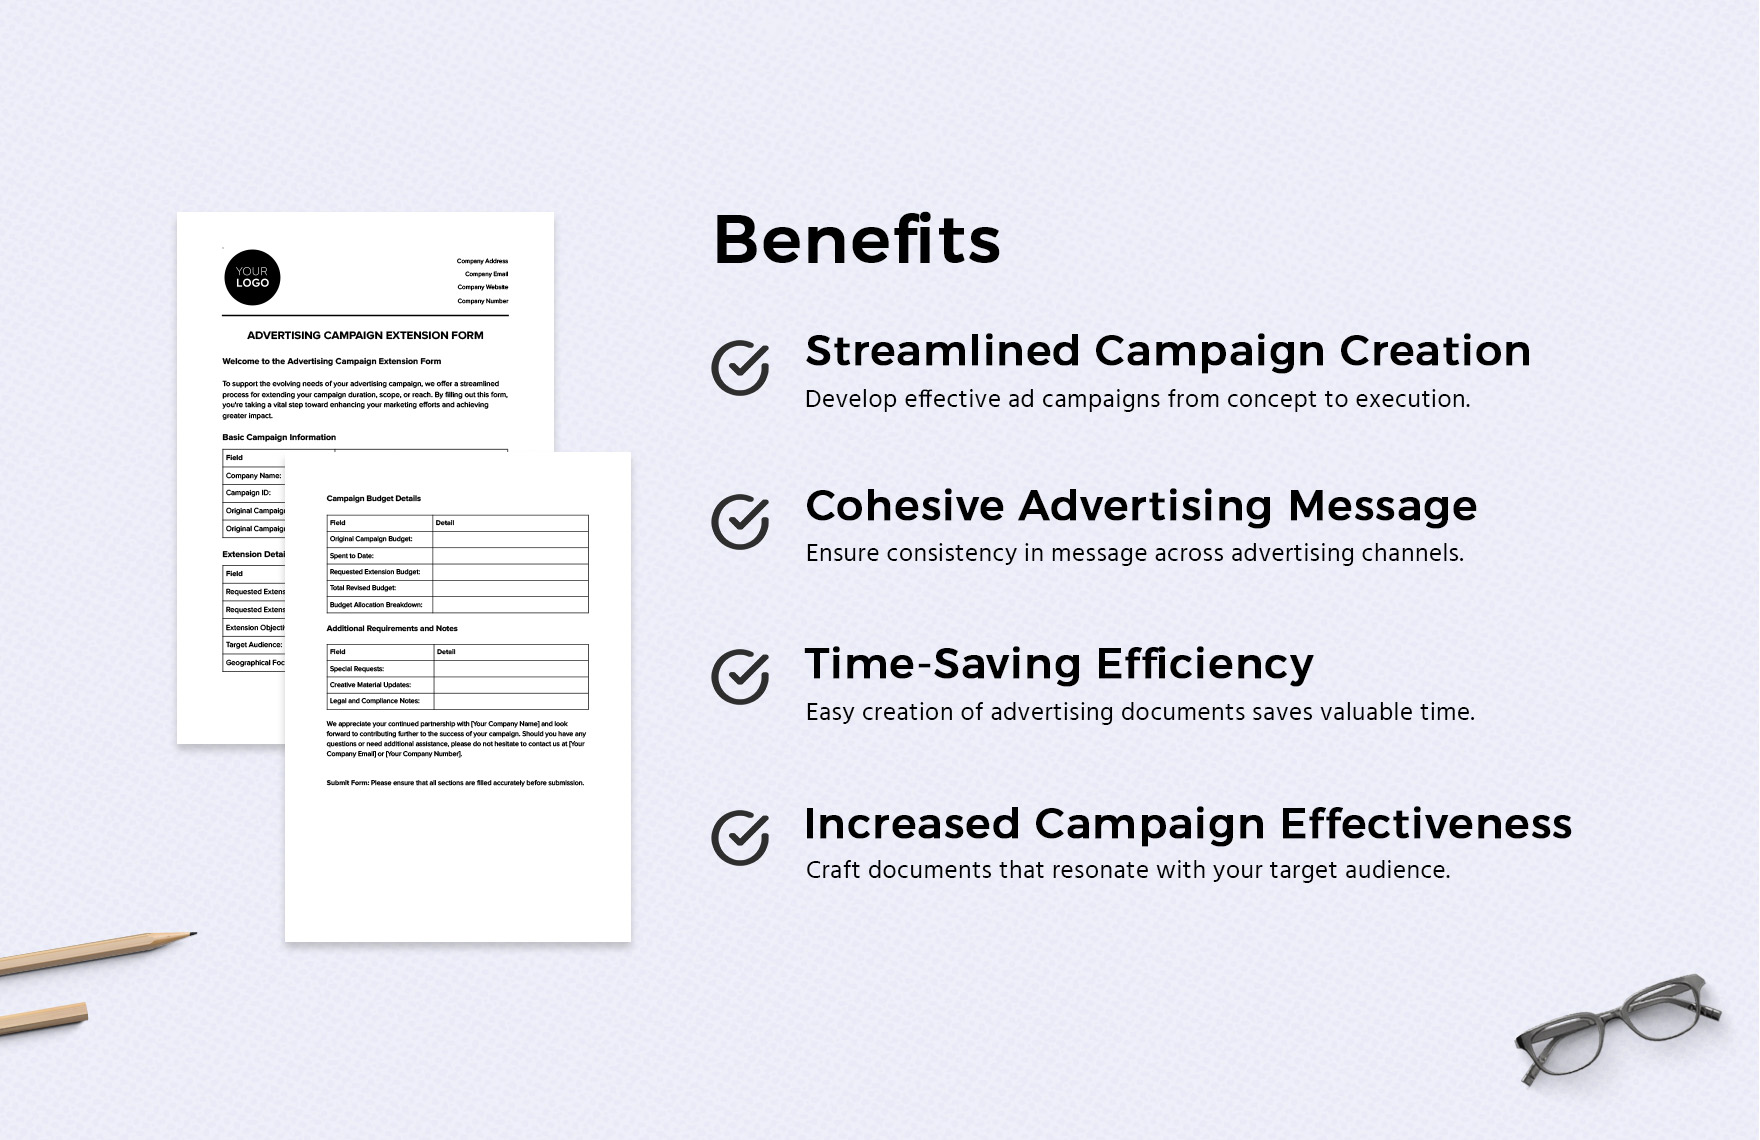 Advertising Campaign Extension Form Template